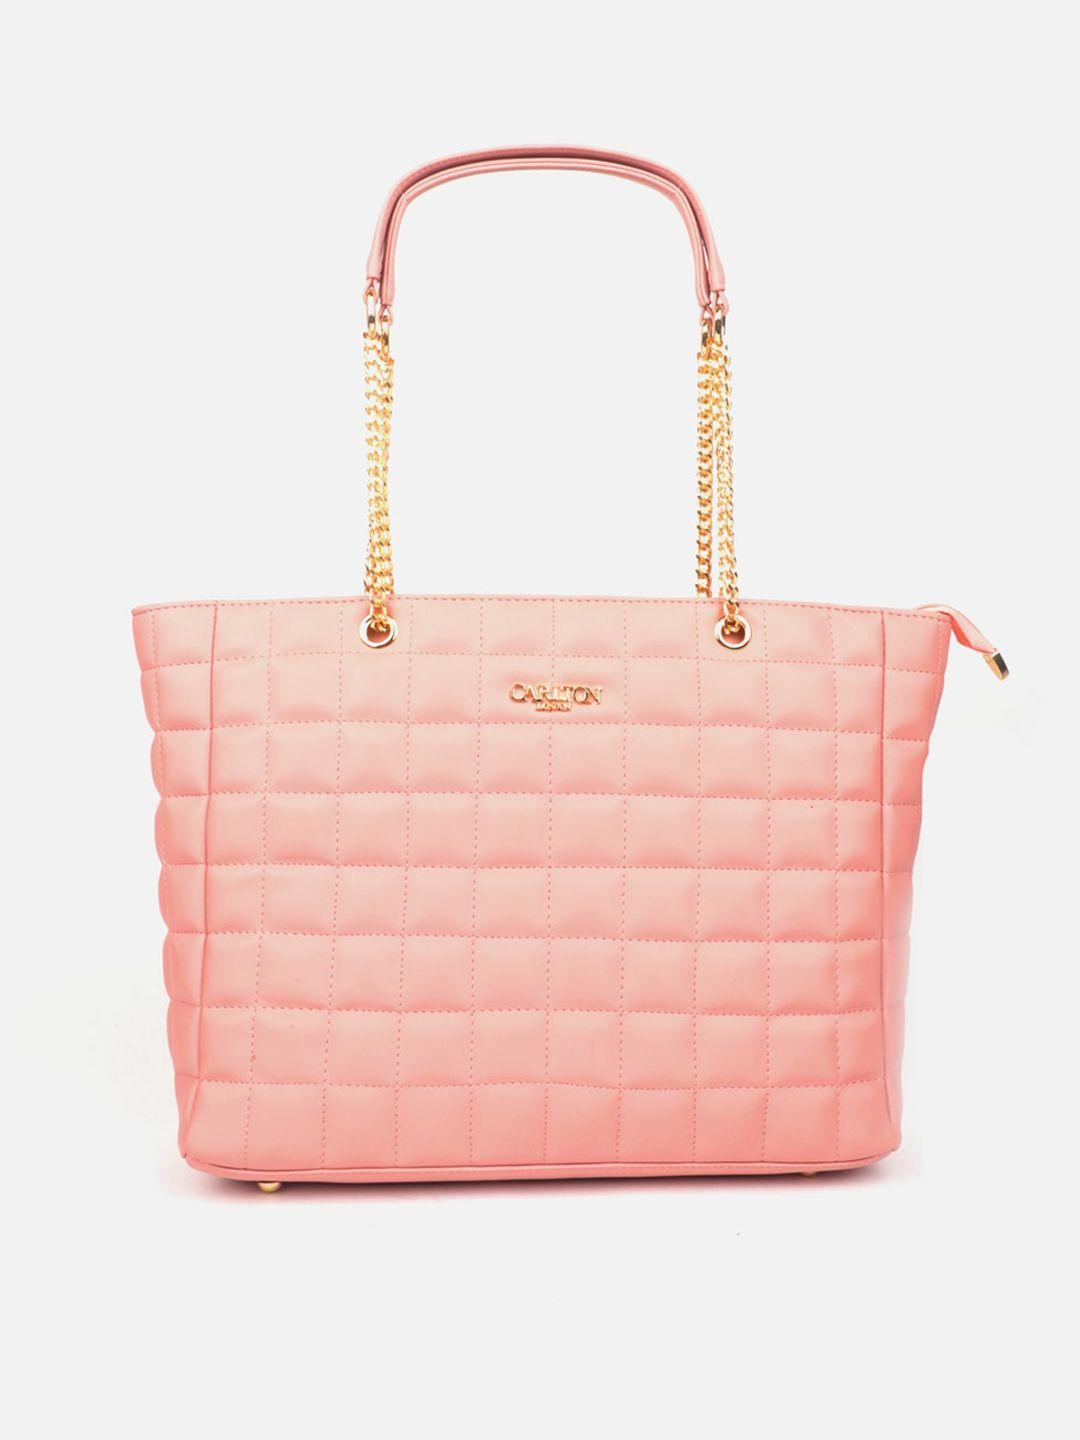 carlton london textured quilted structured handheld bag